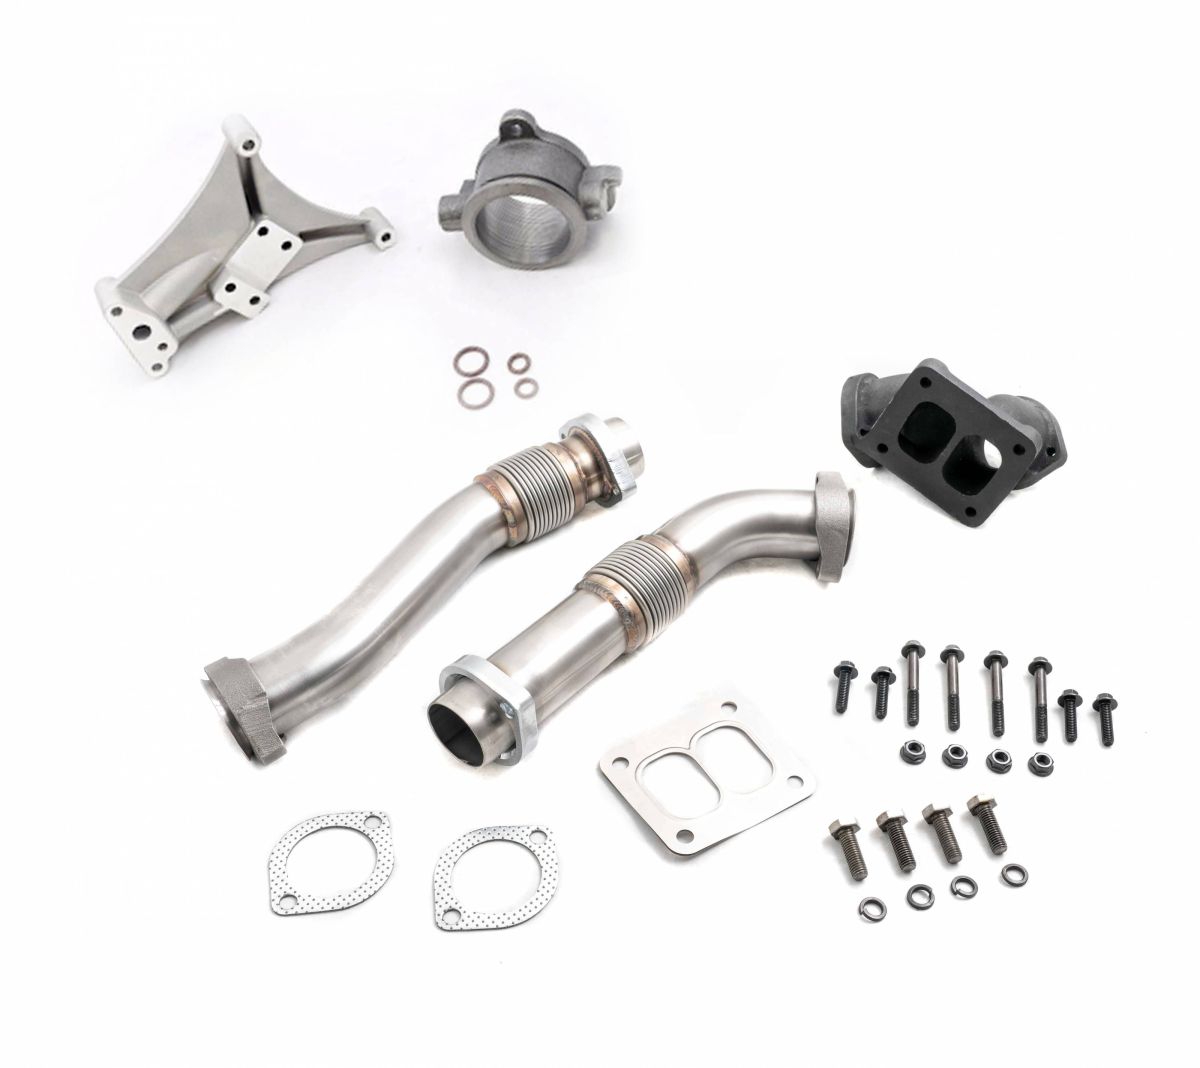 Rudy's Performance Parts - Rudy's Heavy Duty Stainless Steel Bellowed Replacement Turbocharger Up Pipe Kit with Non-EBP Pedestal & Housing For 94-97 7.3 Powerstroke